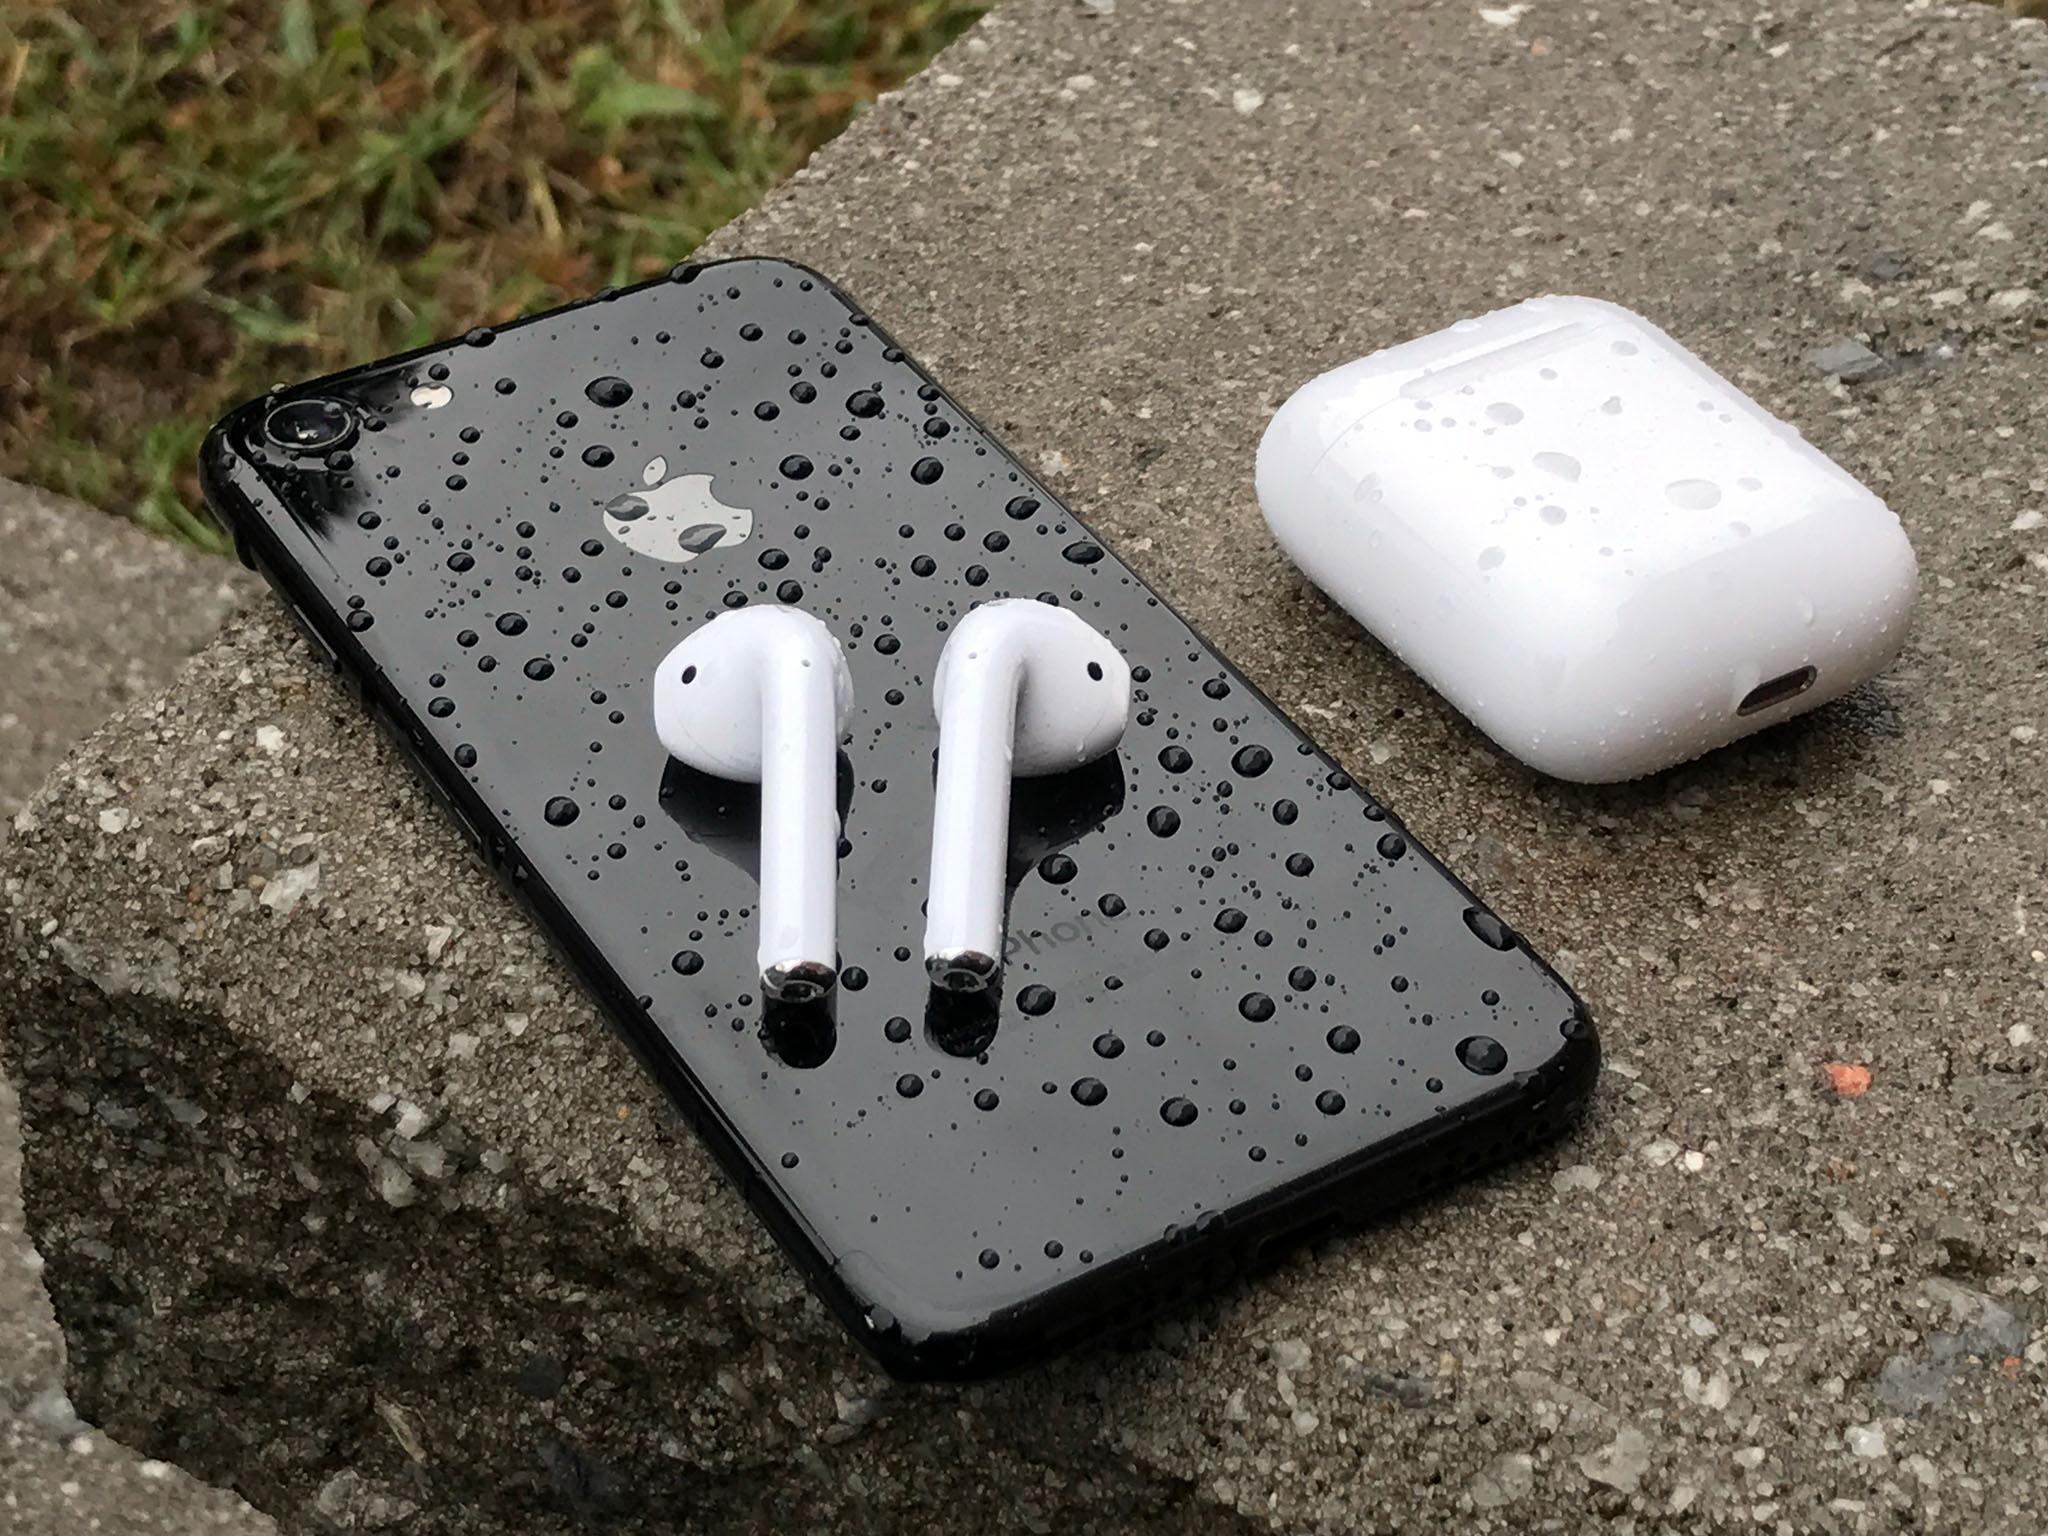 How to troubleshoot and reset your AirPods